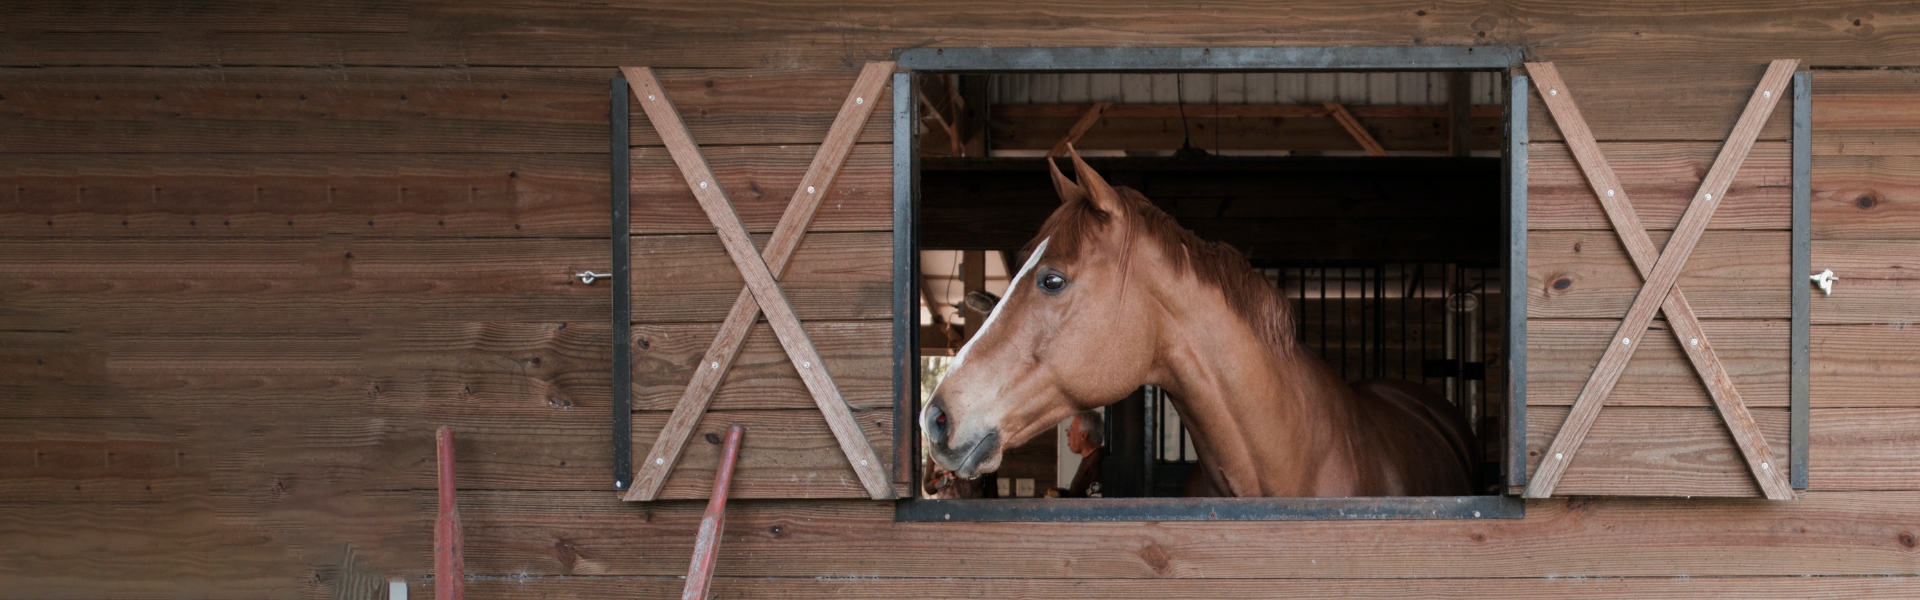 Horse in stable, looking out of side window.